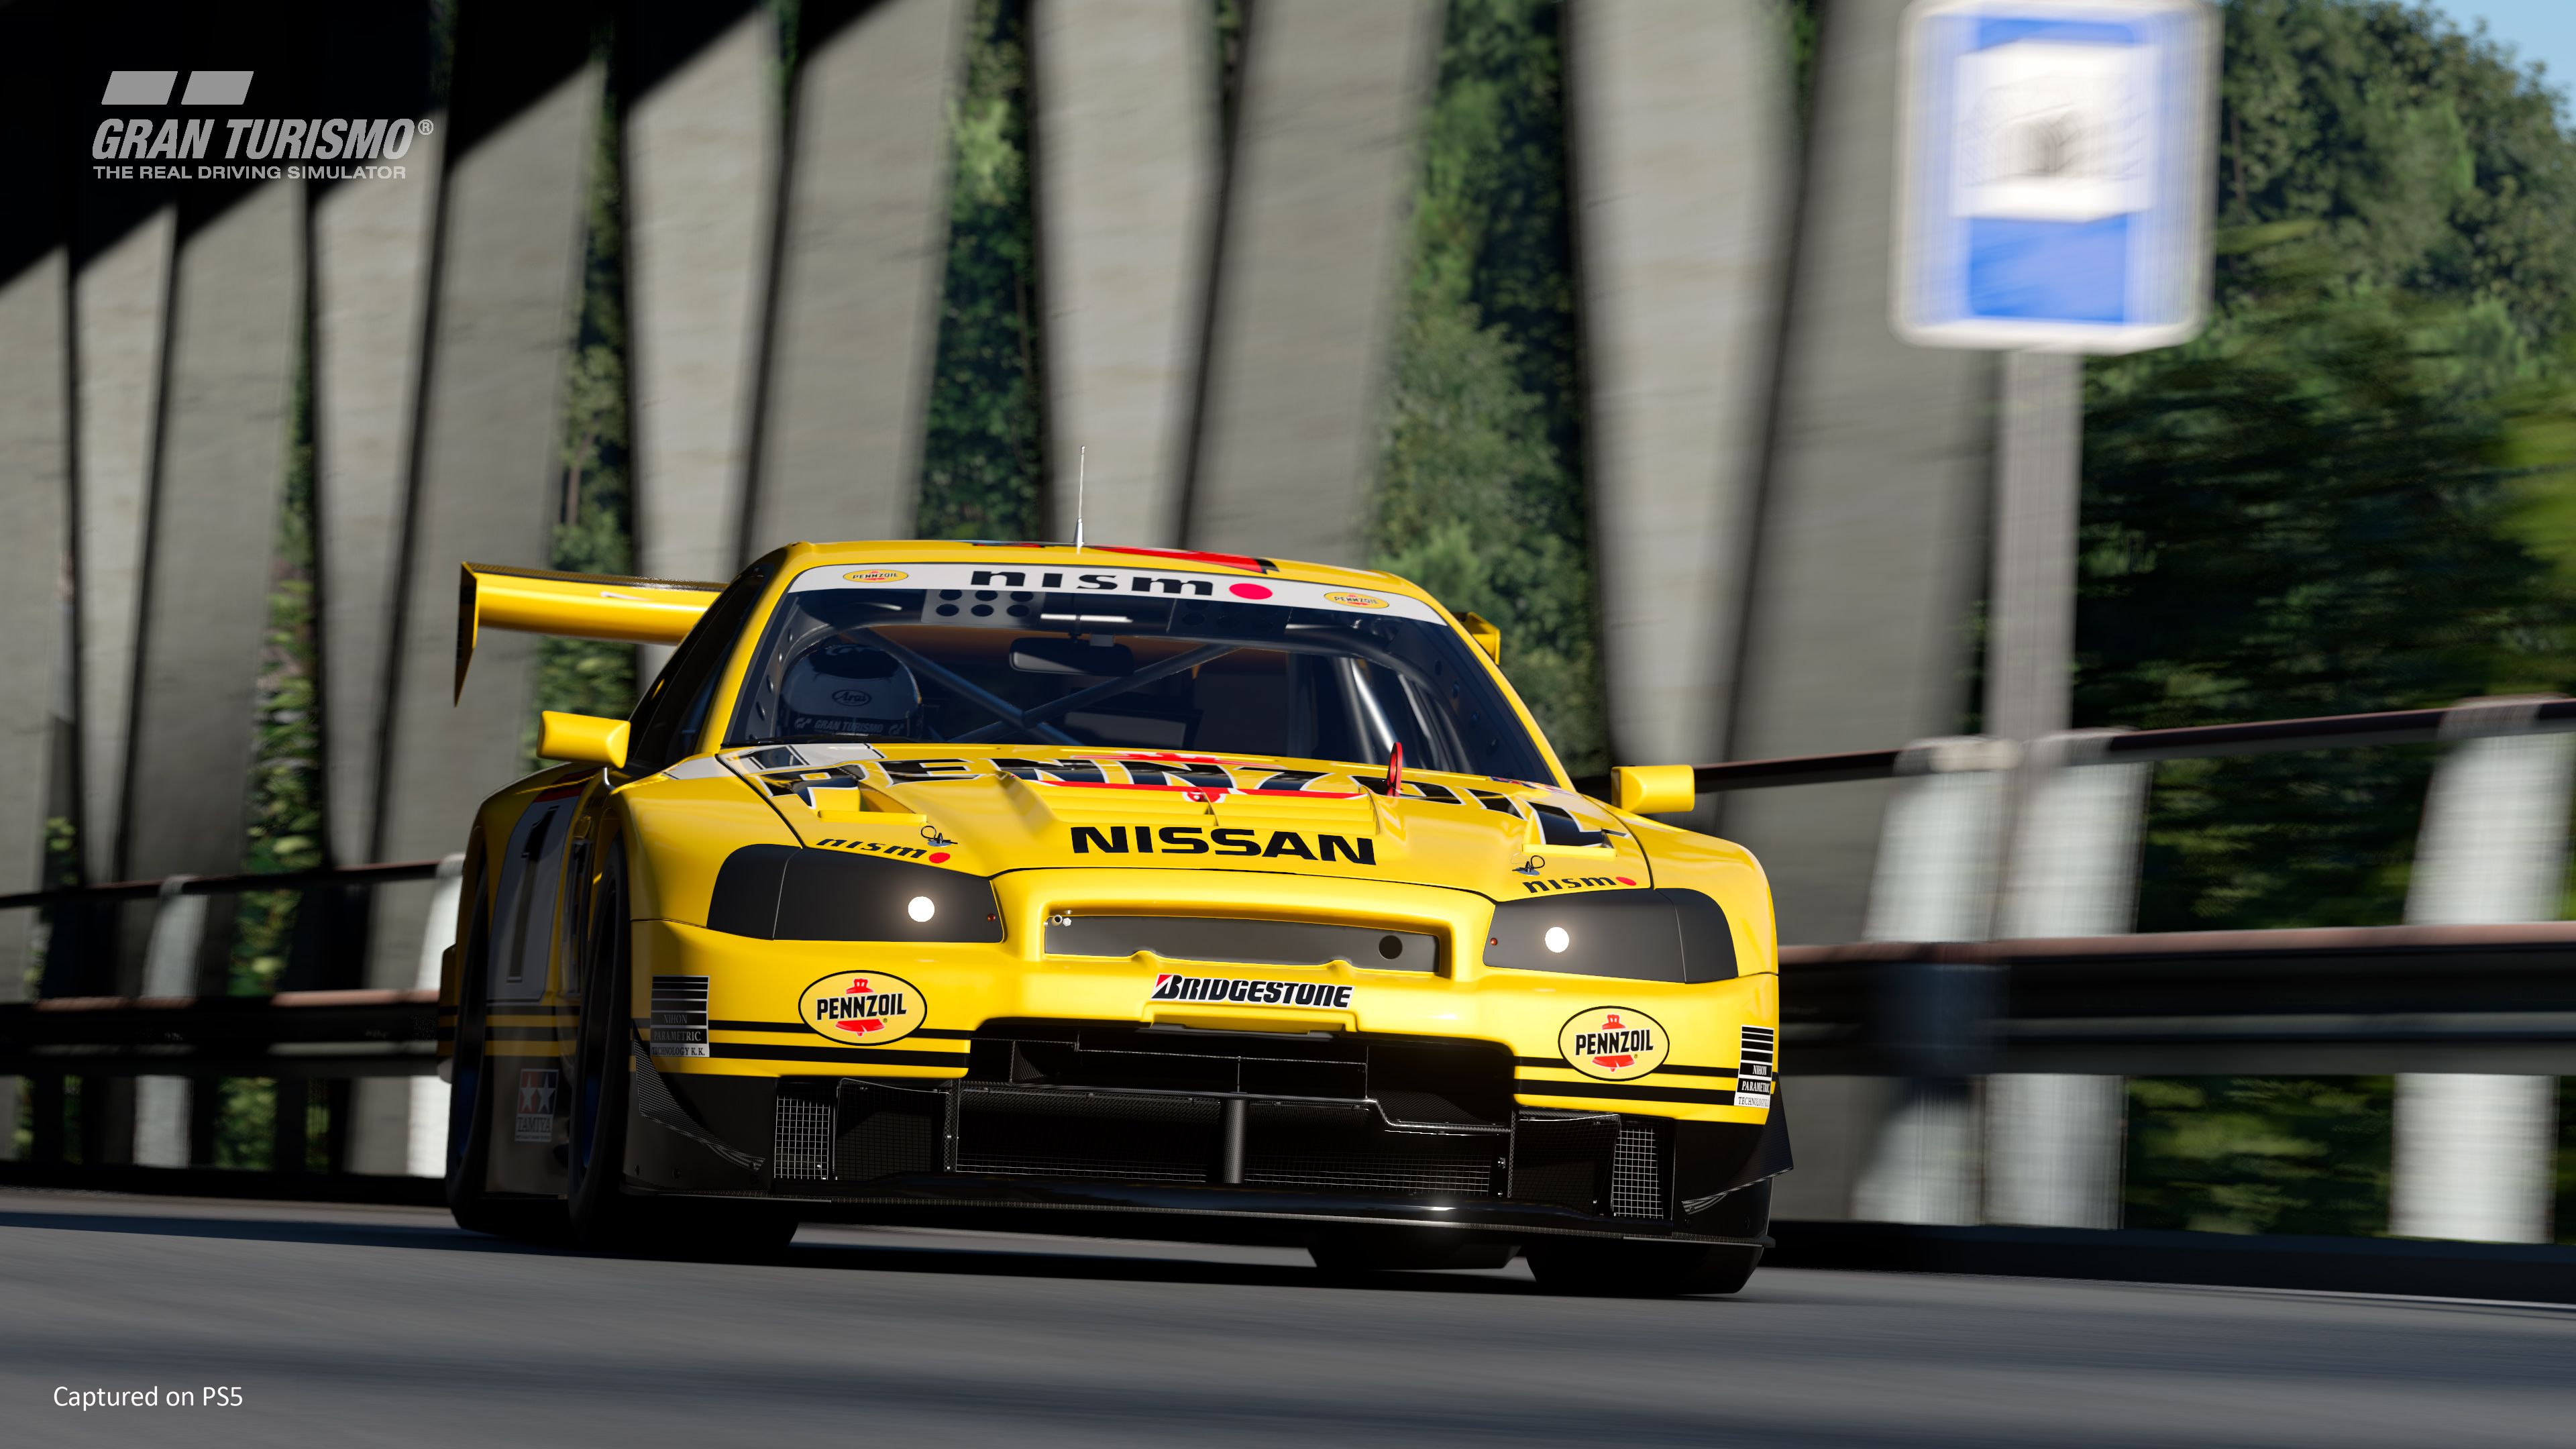 Gran Turismo 7 Review: The Best in the Series Since GT4